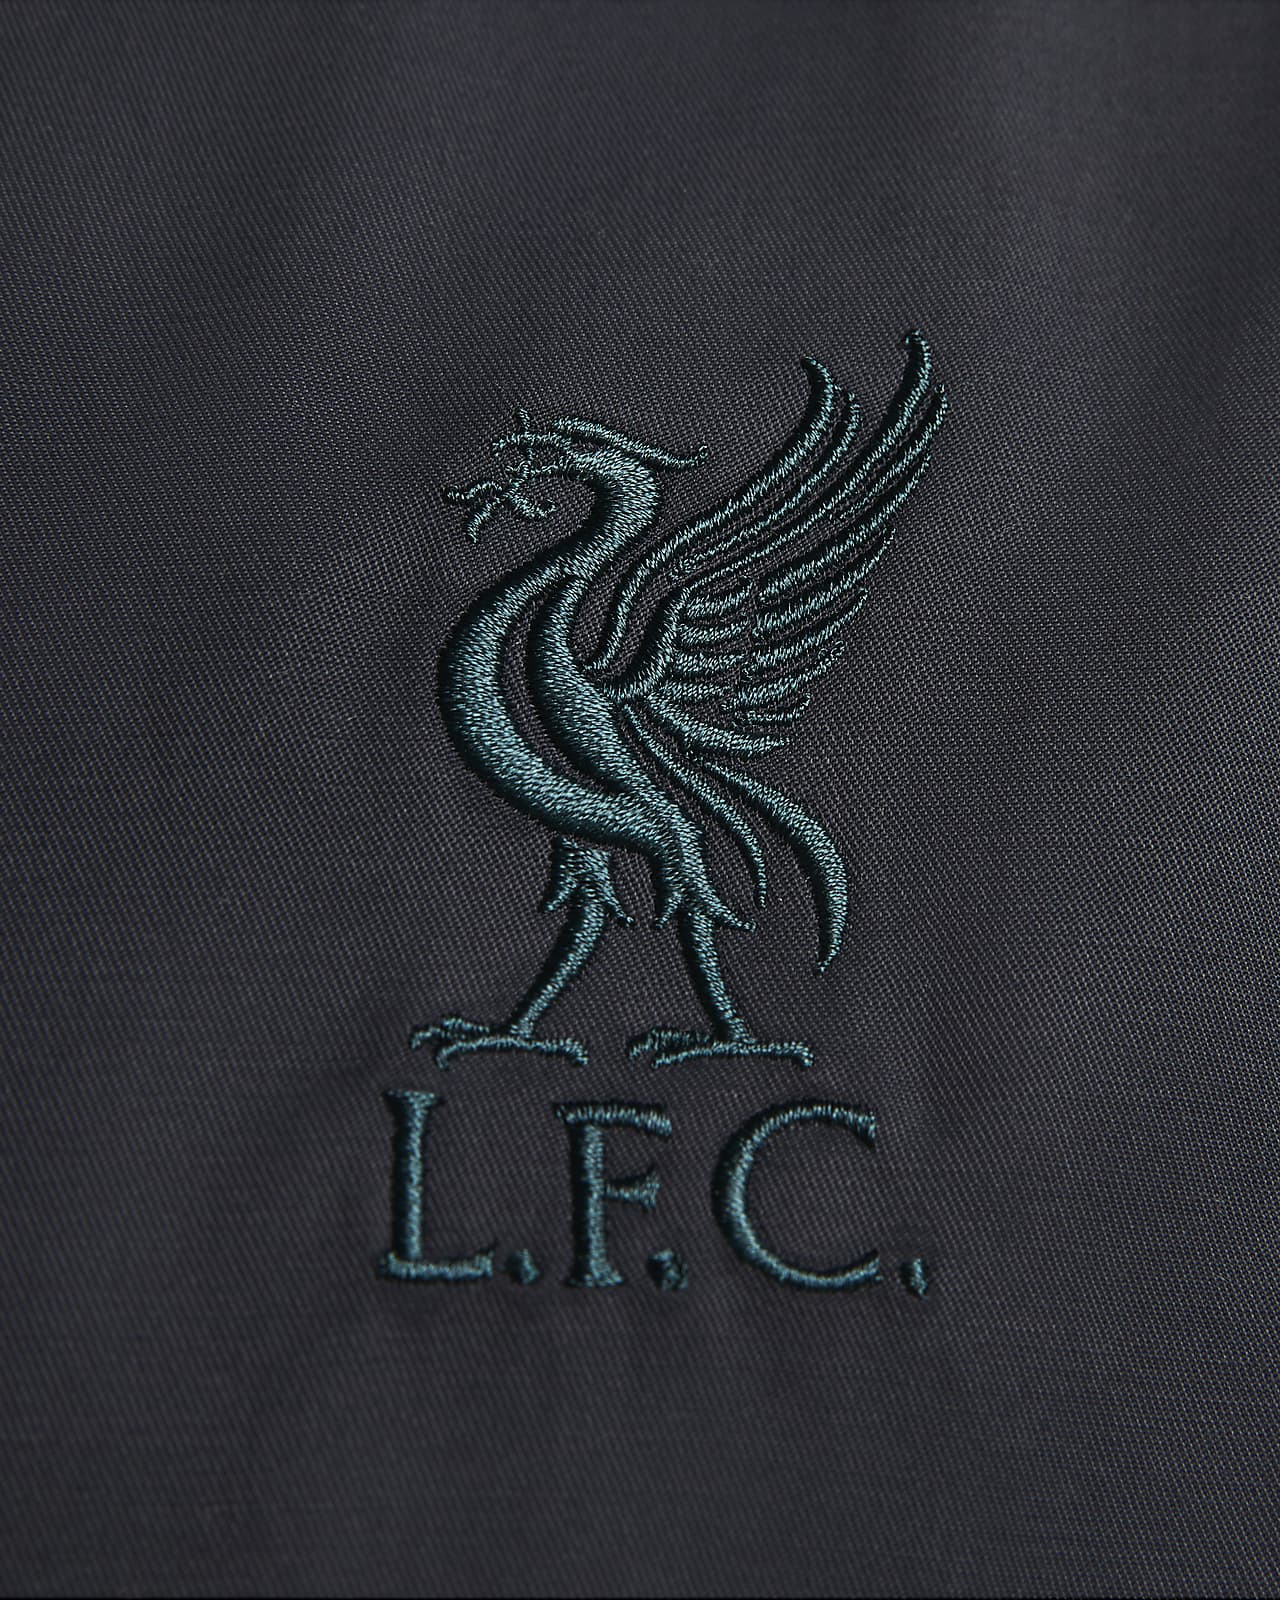 Liverpool F.C. flag waving in slow motio... | Stock Video | Pond5